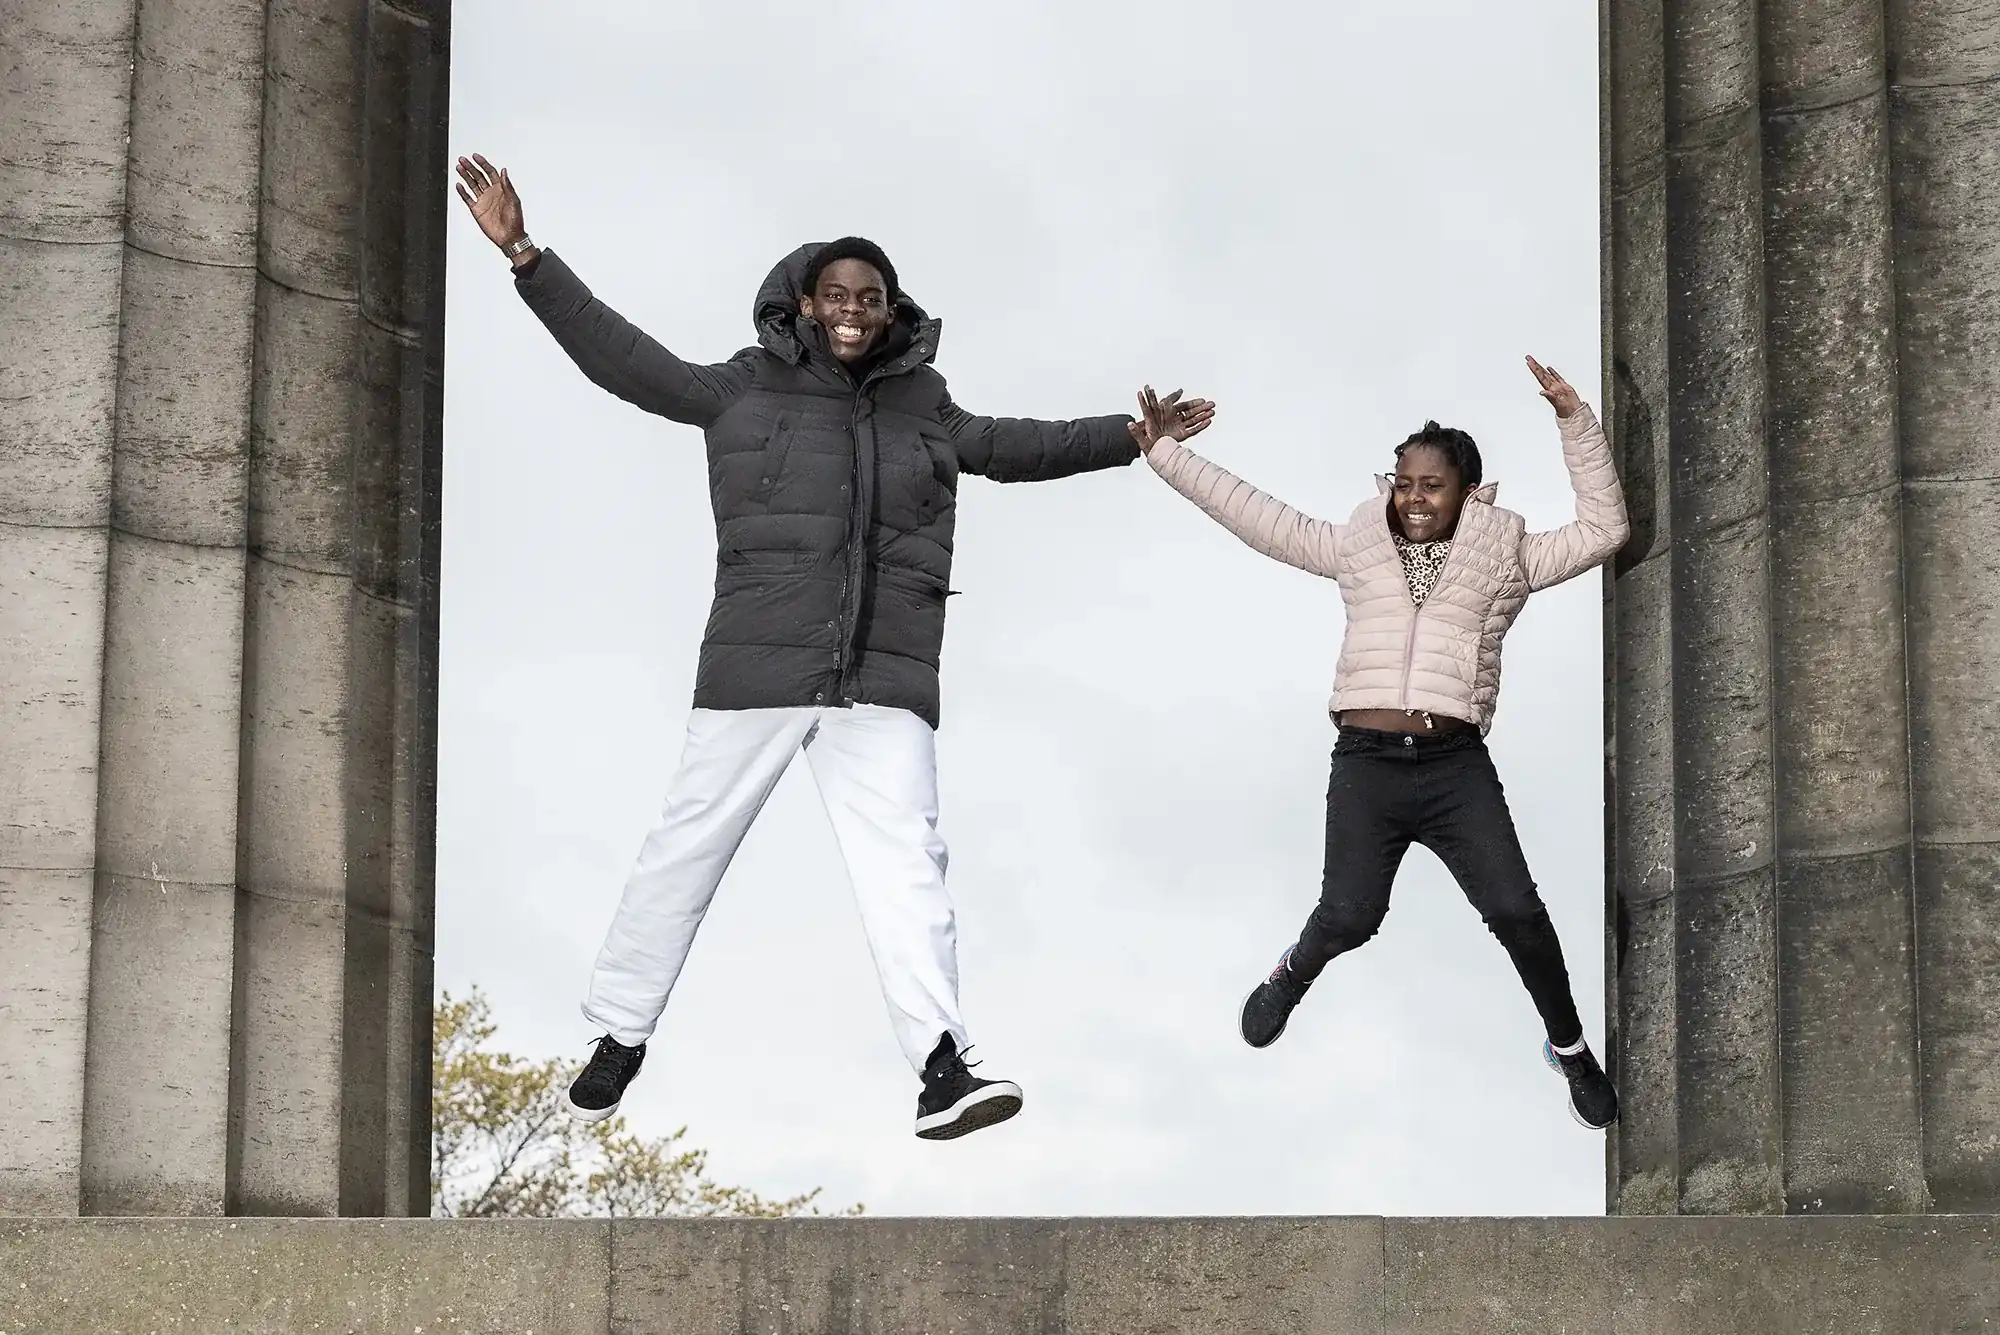 Two people are jumping and holding hands in front of a stone structure. They are both wearing jackets and appear to be smiling. The sky is overcast.